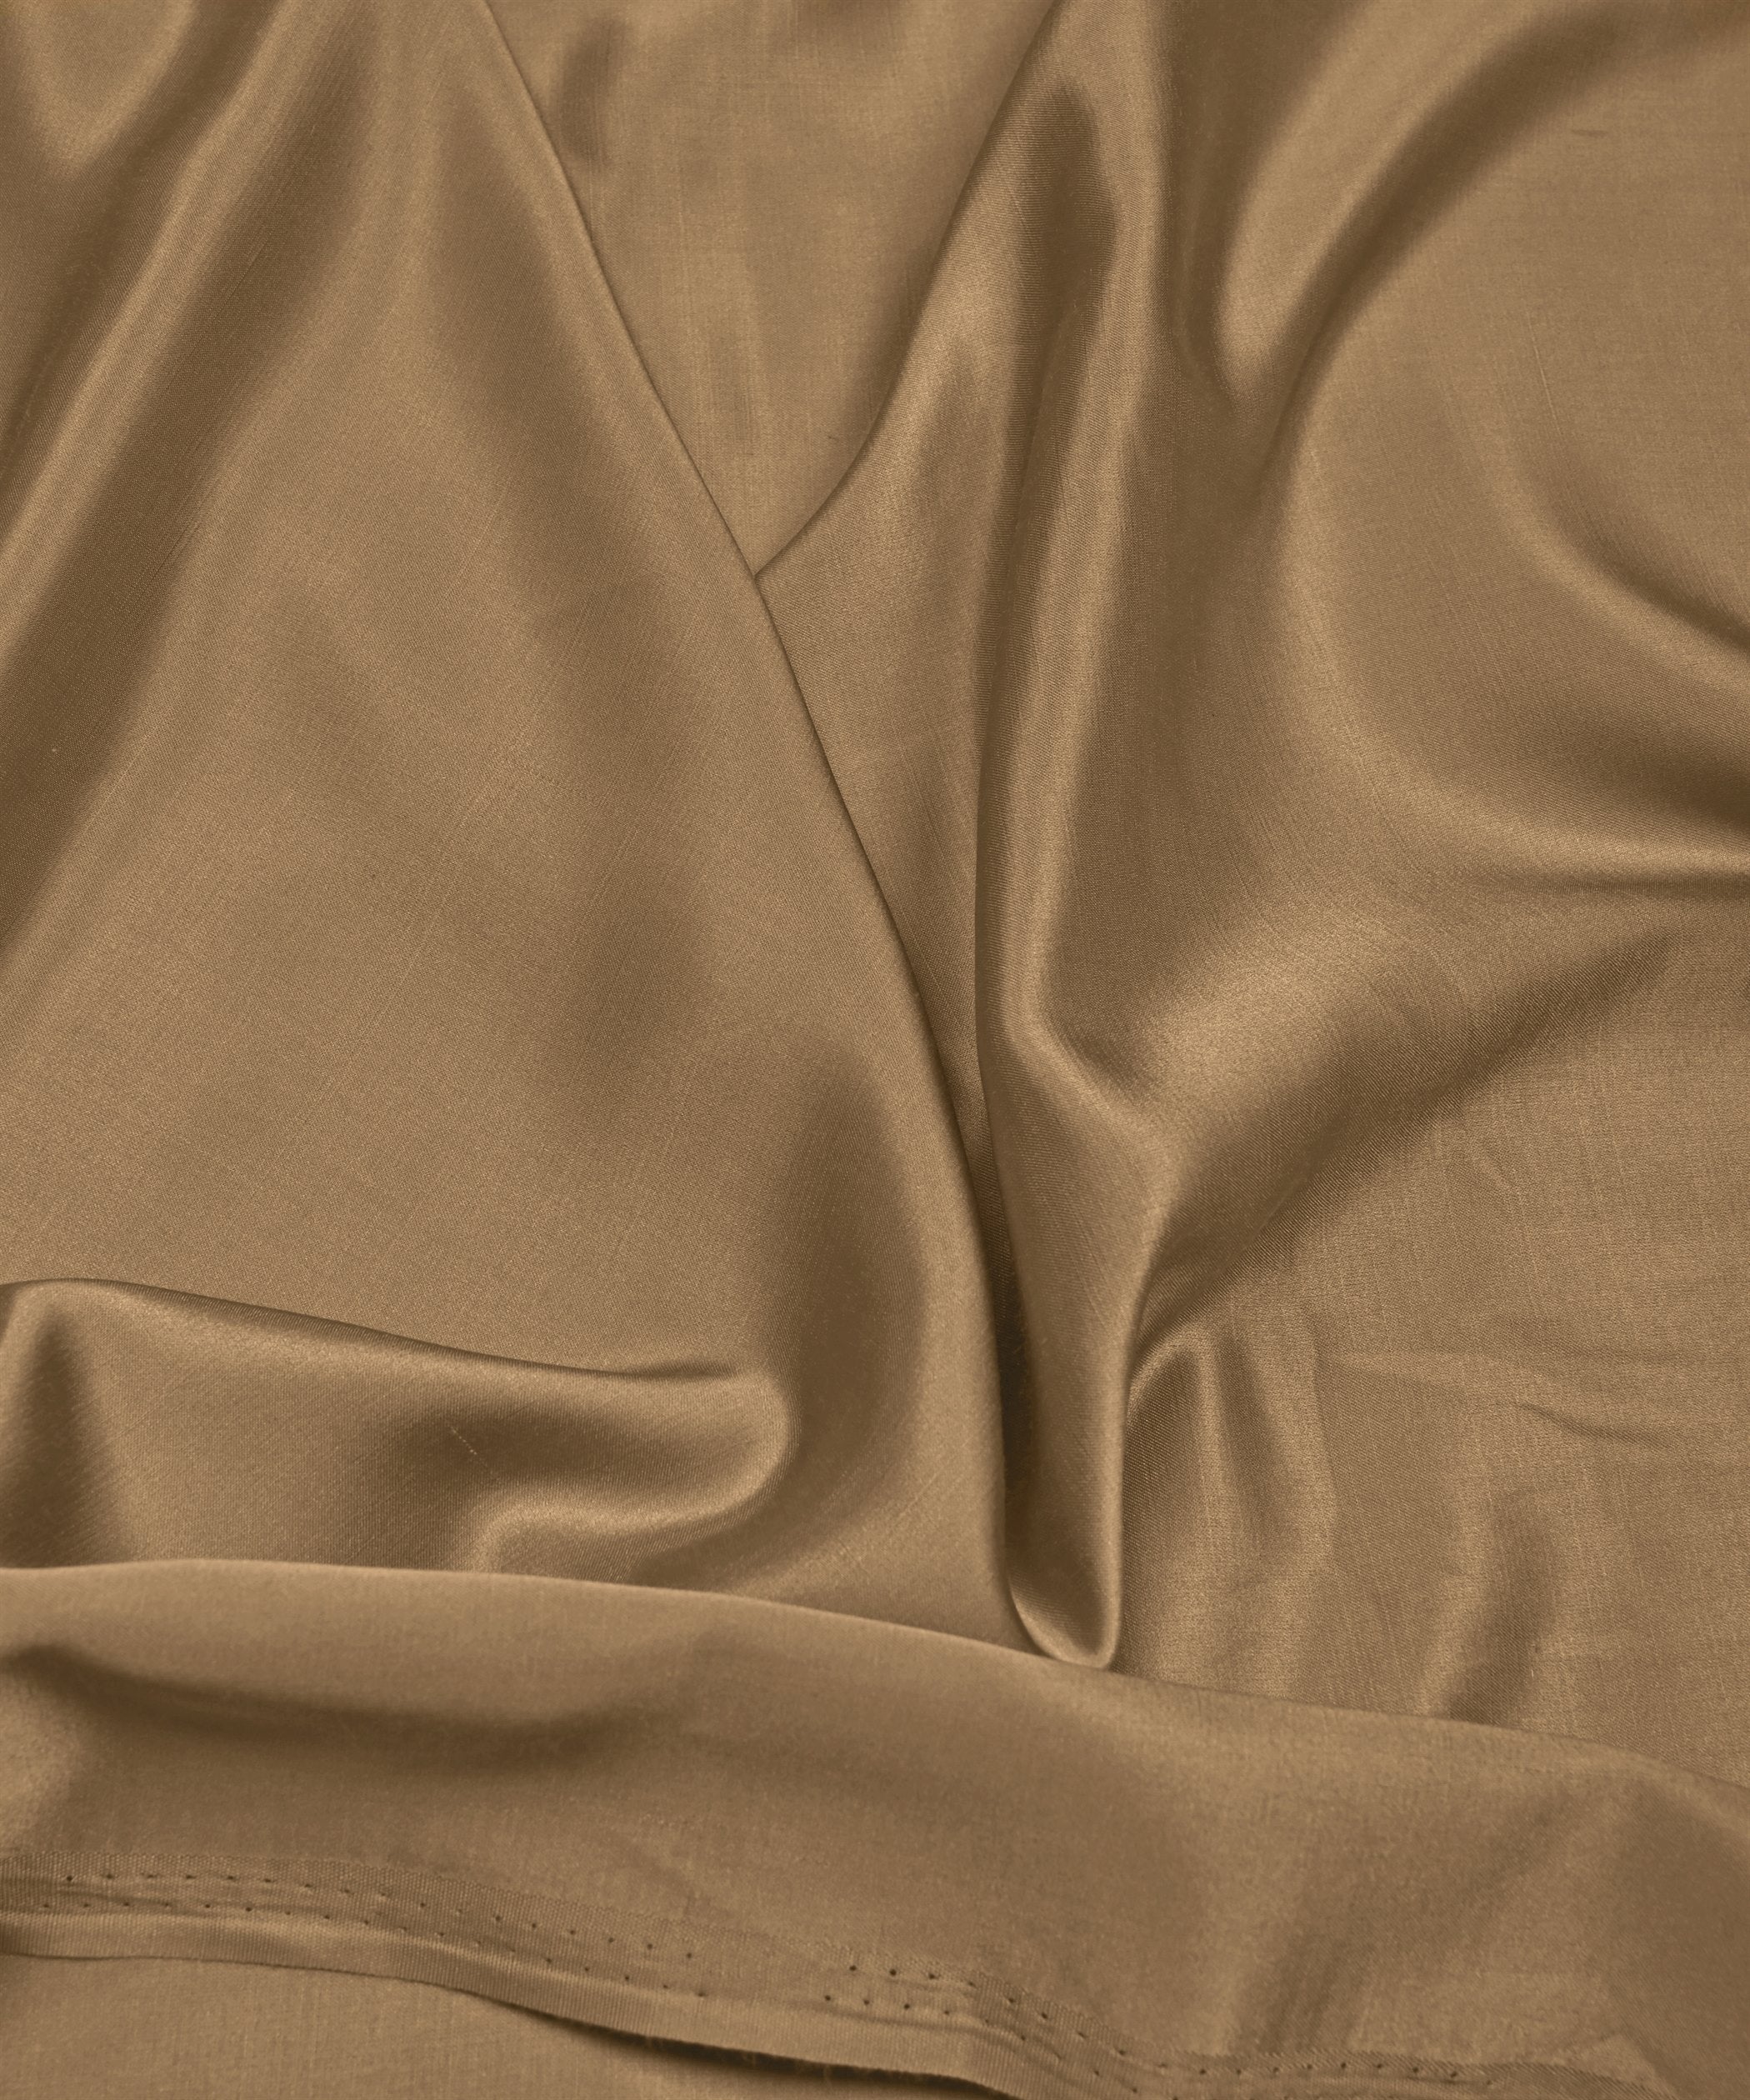 Buy Wood Plain Modal Satin Fabric Online At Wholesale Prices – Fabric Depot